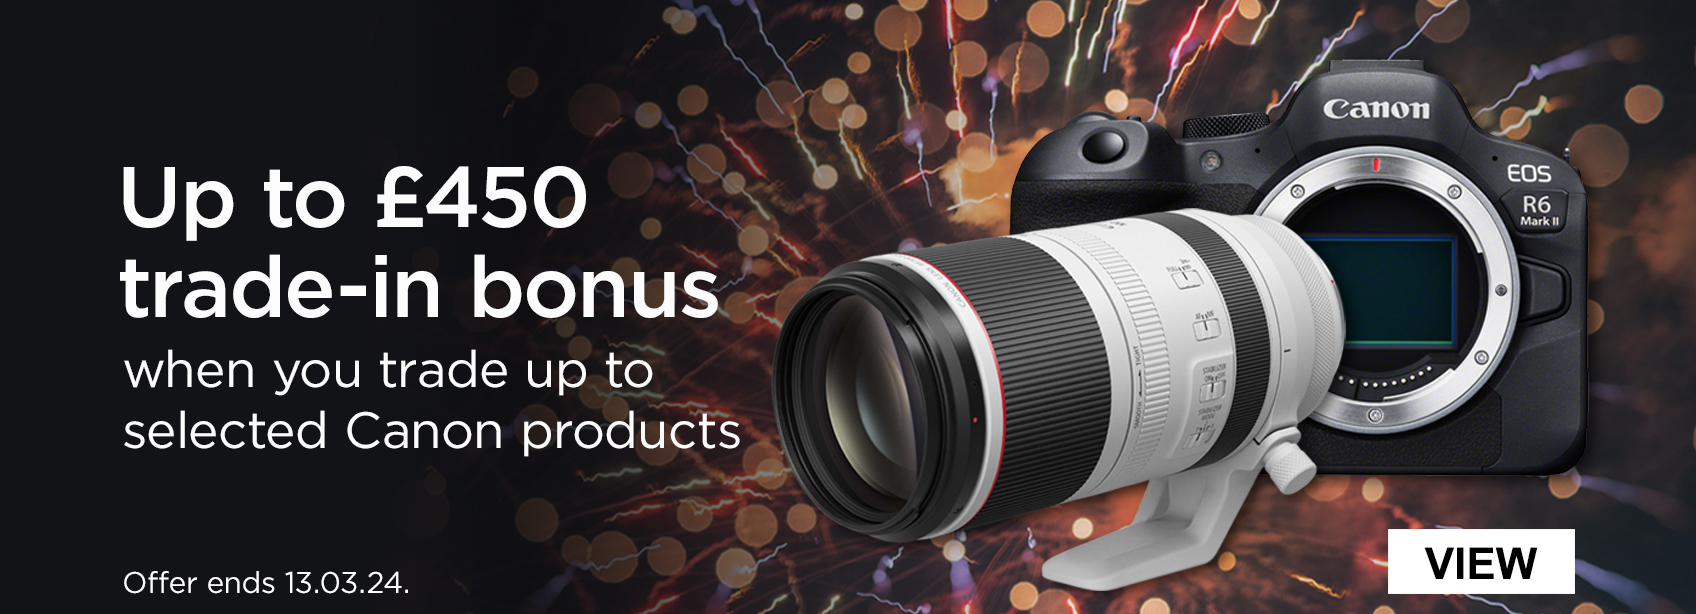 Up to £450 trade-in bonus when you trade up to selected Canon products. Offers ends 13.03.24. 